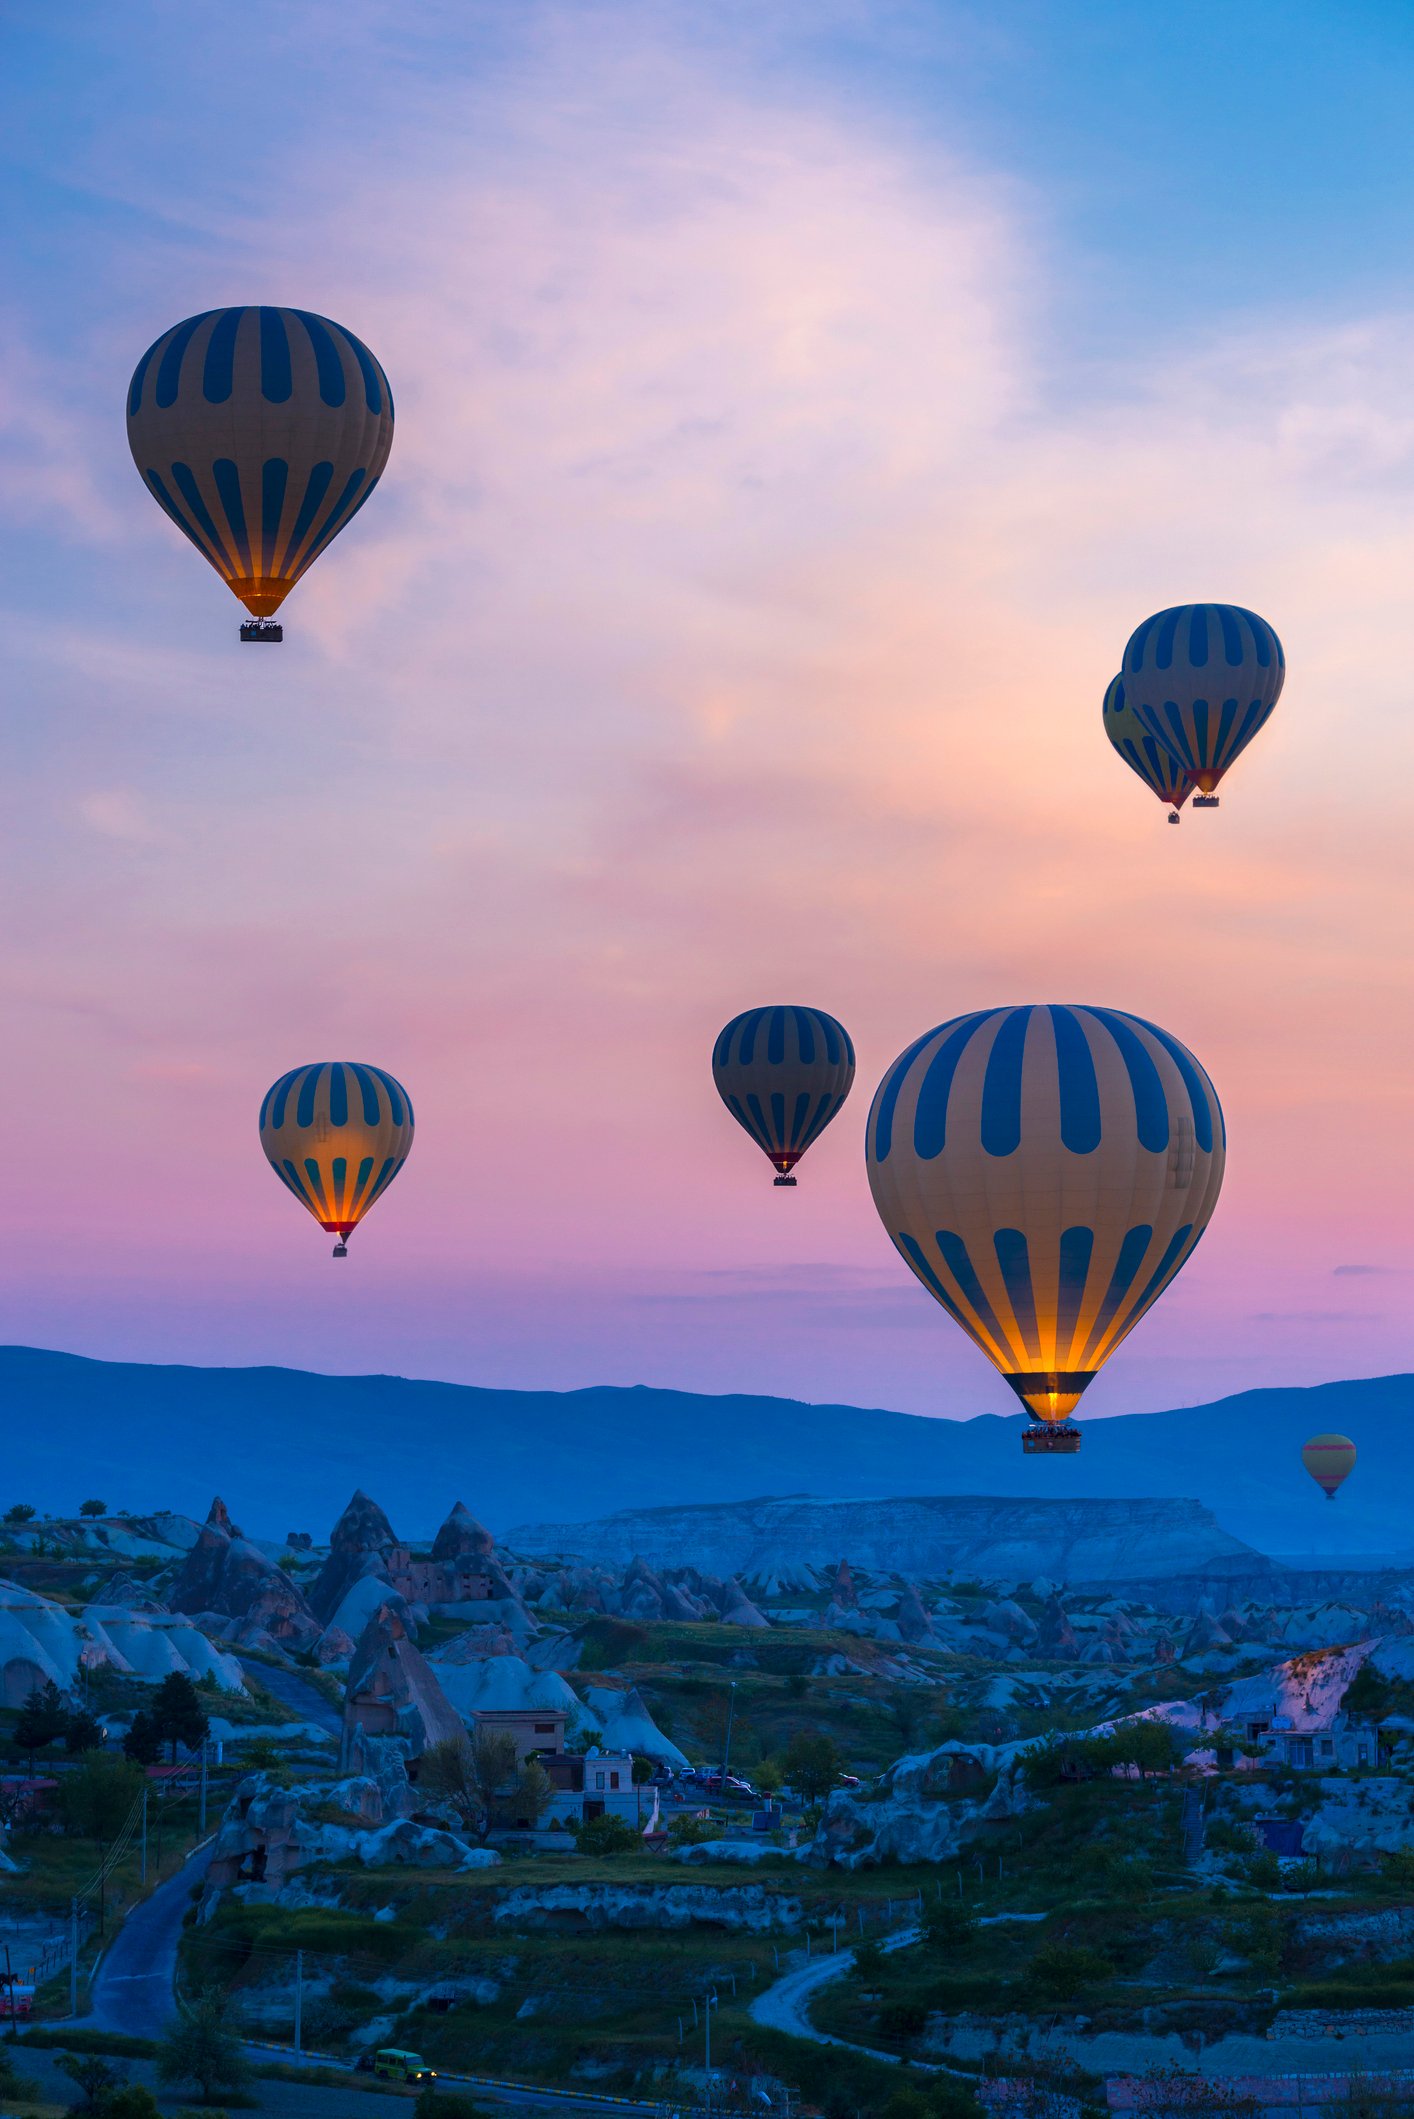 Early hours of the morning, just before the sun rises, are great for a hot air balloon ride. (iStock Photo)